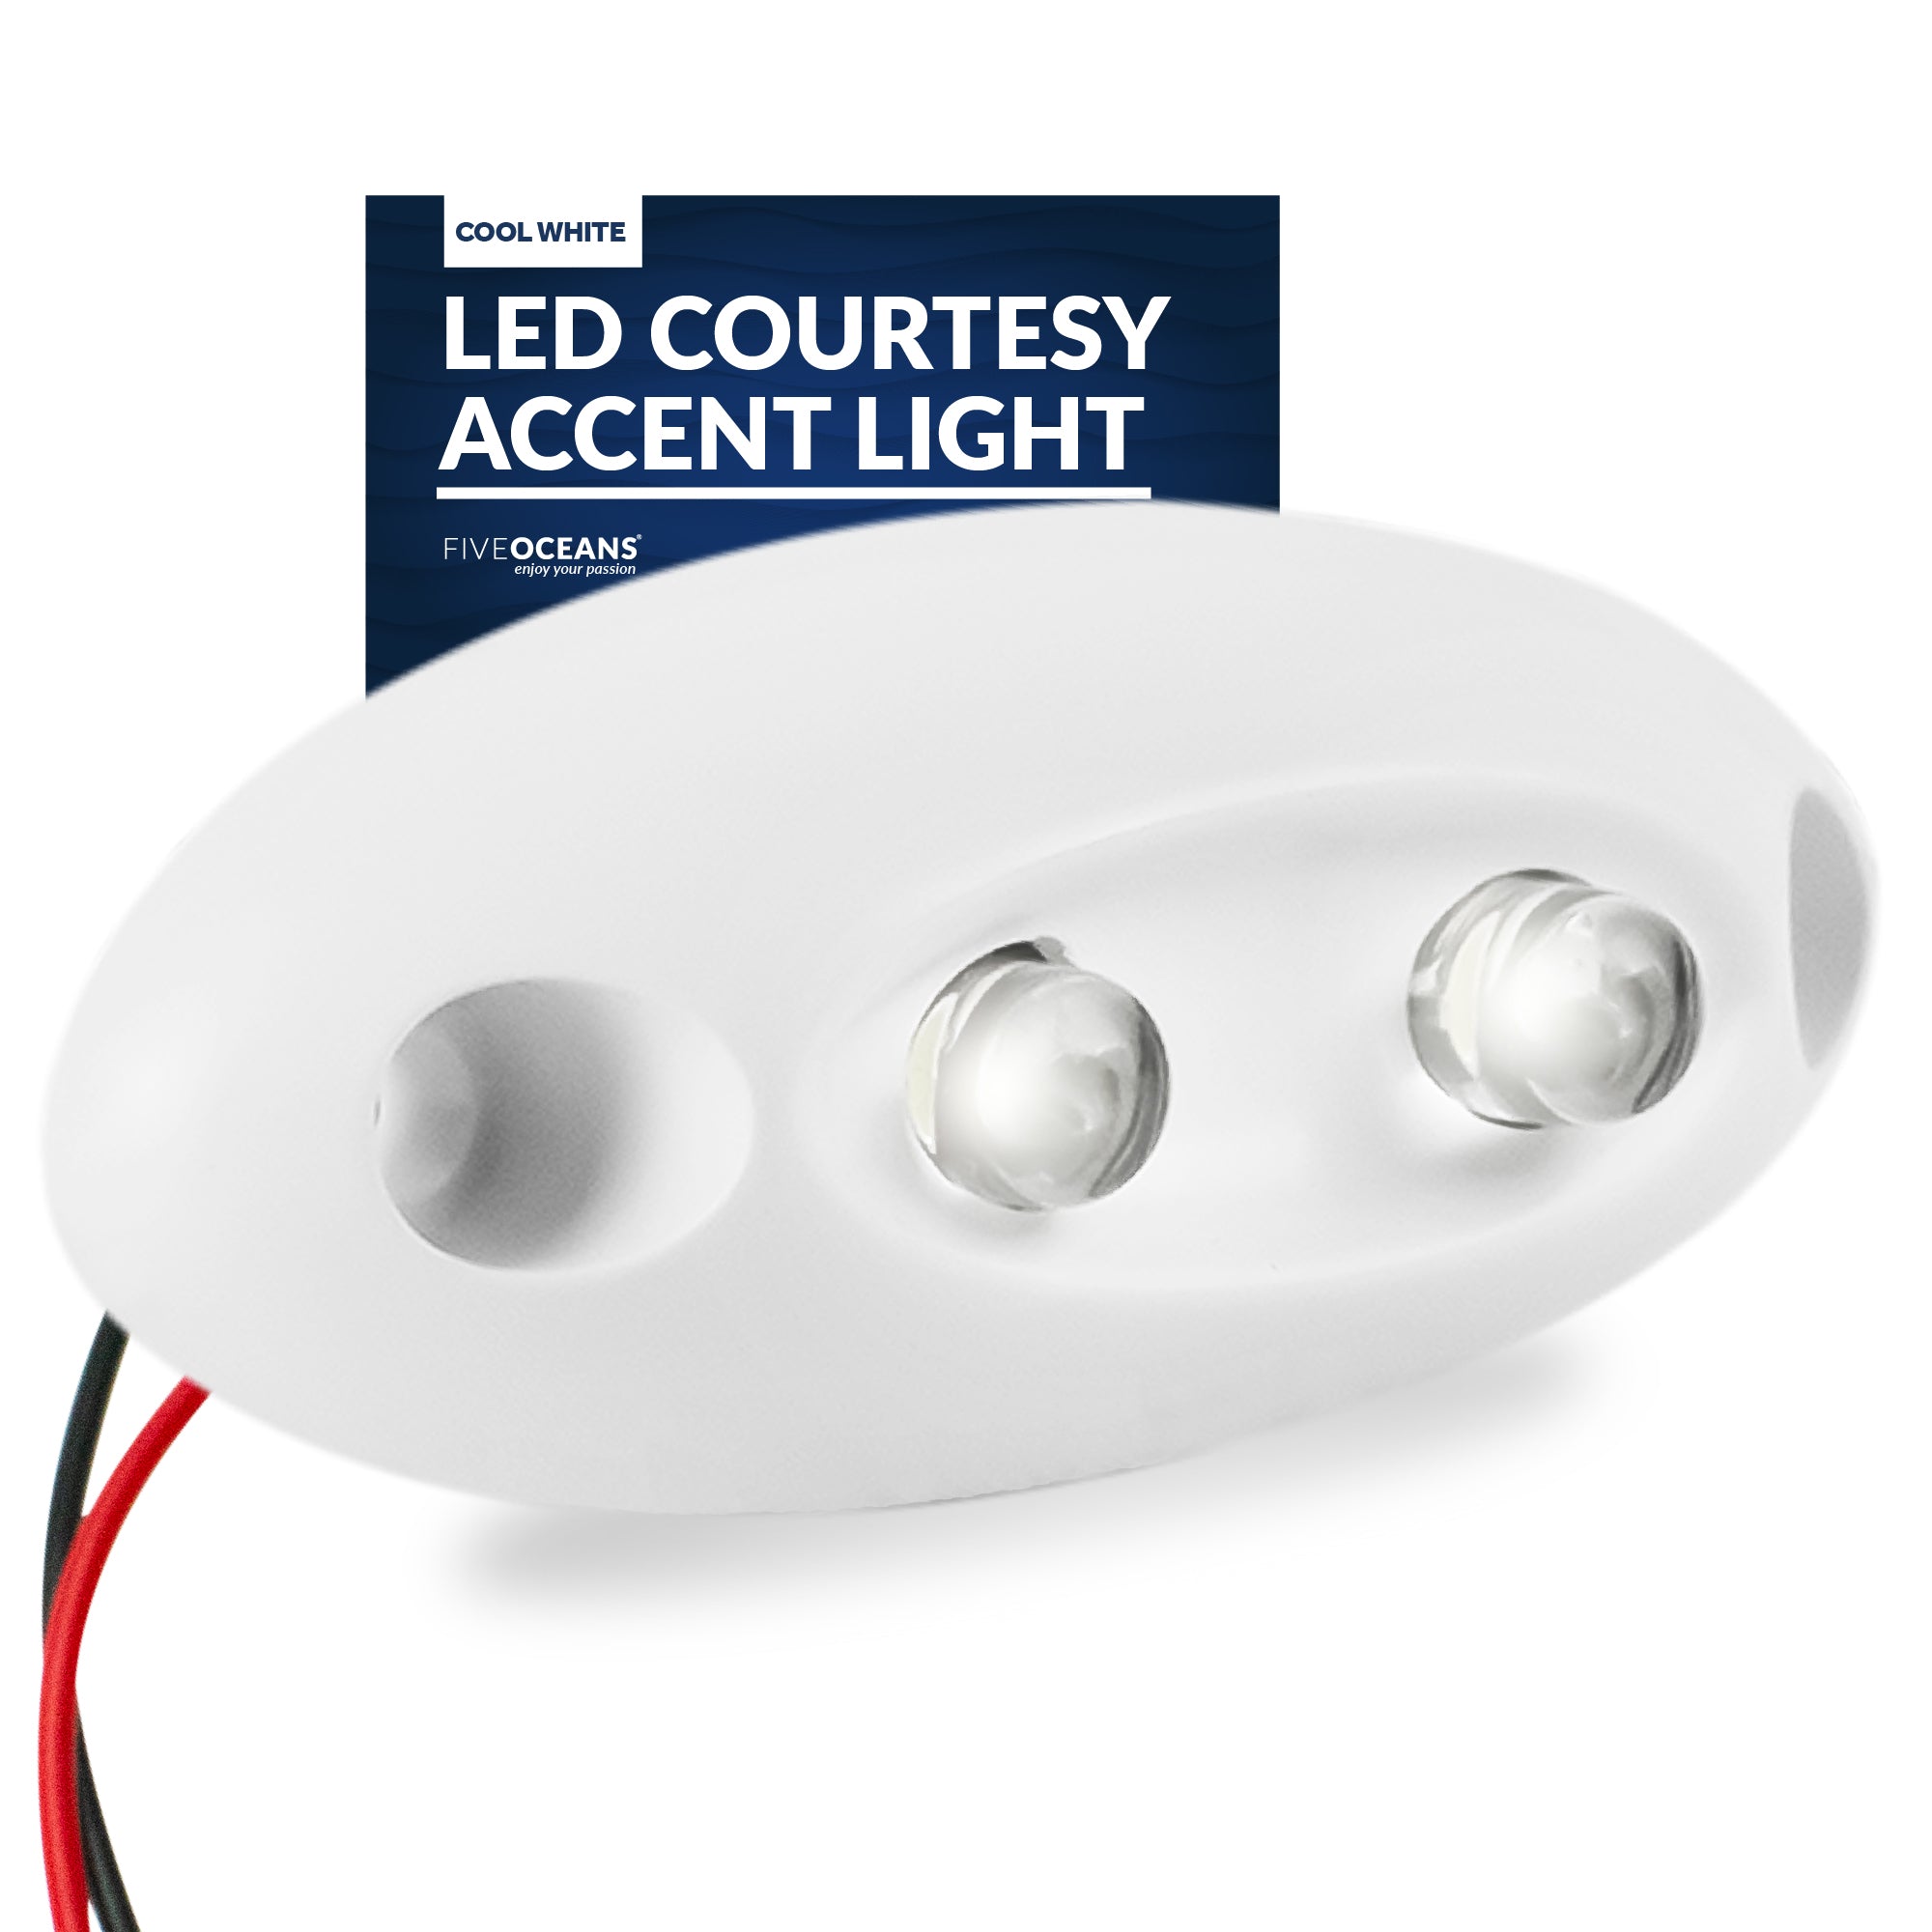 LED Courtesy Accent Light, Oblong, Cool White - FO2424